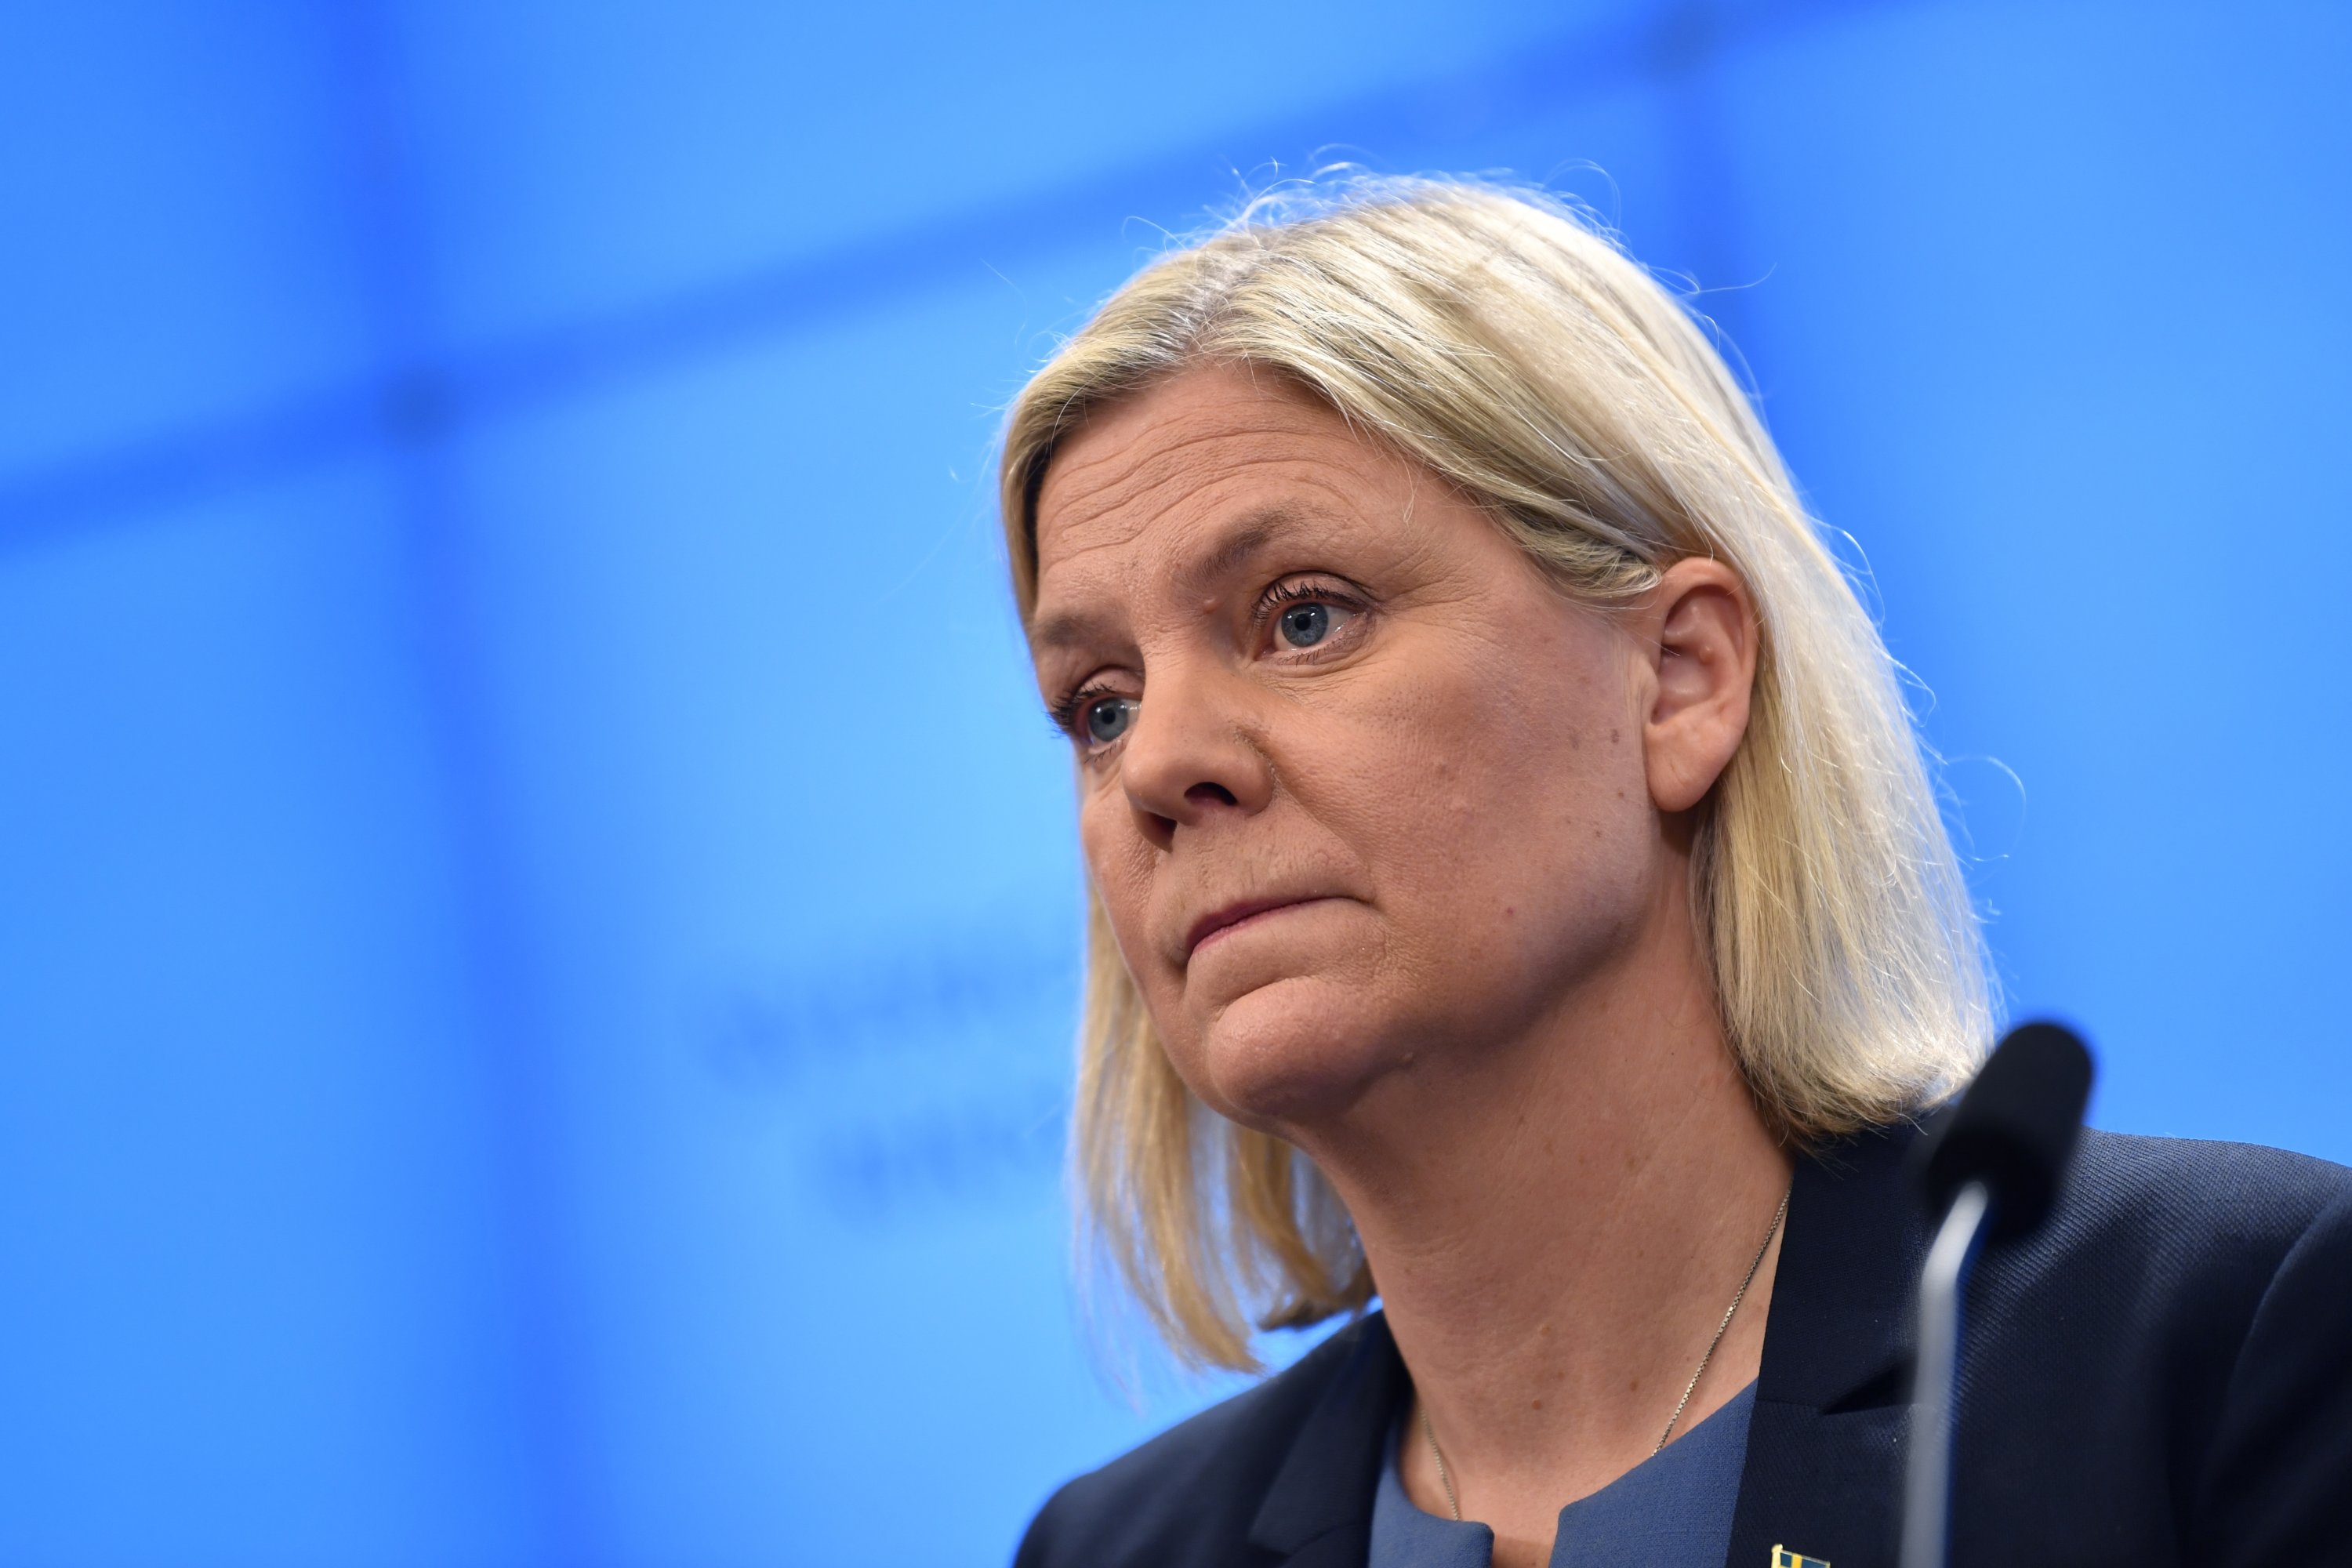 Sweden's first female PM Andersson quits hours after taking charge ...